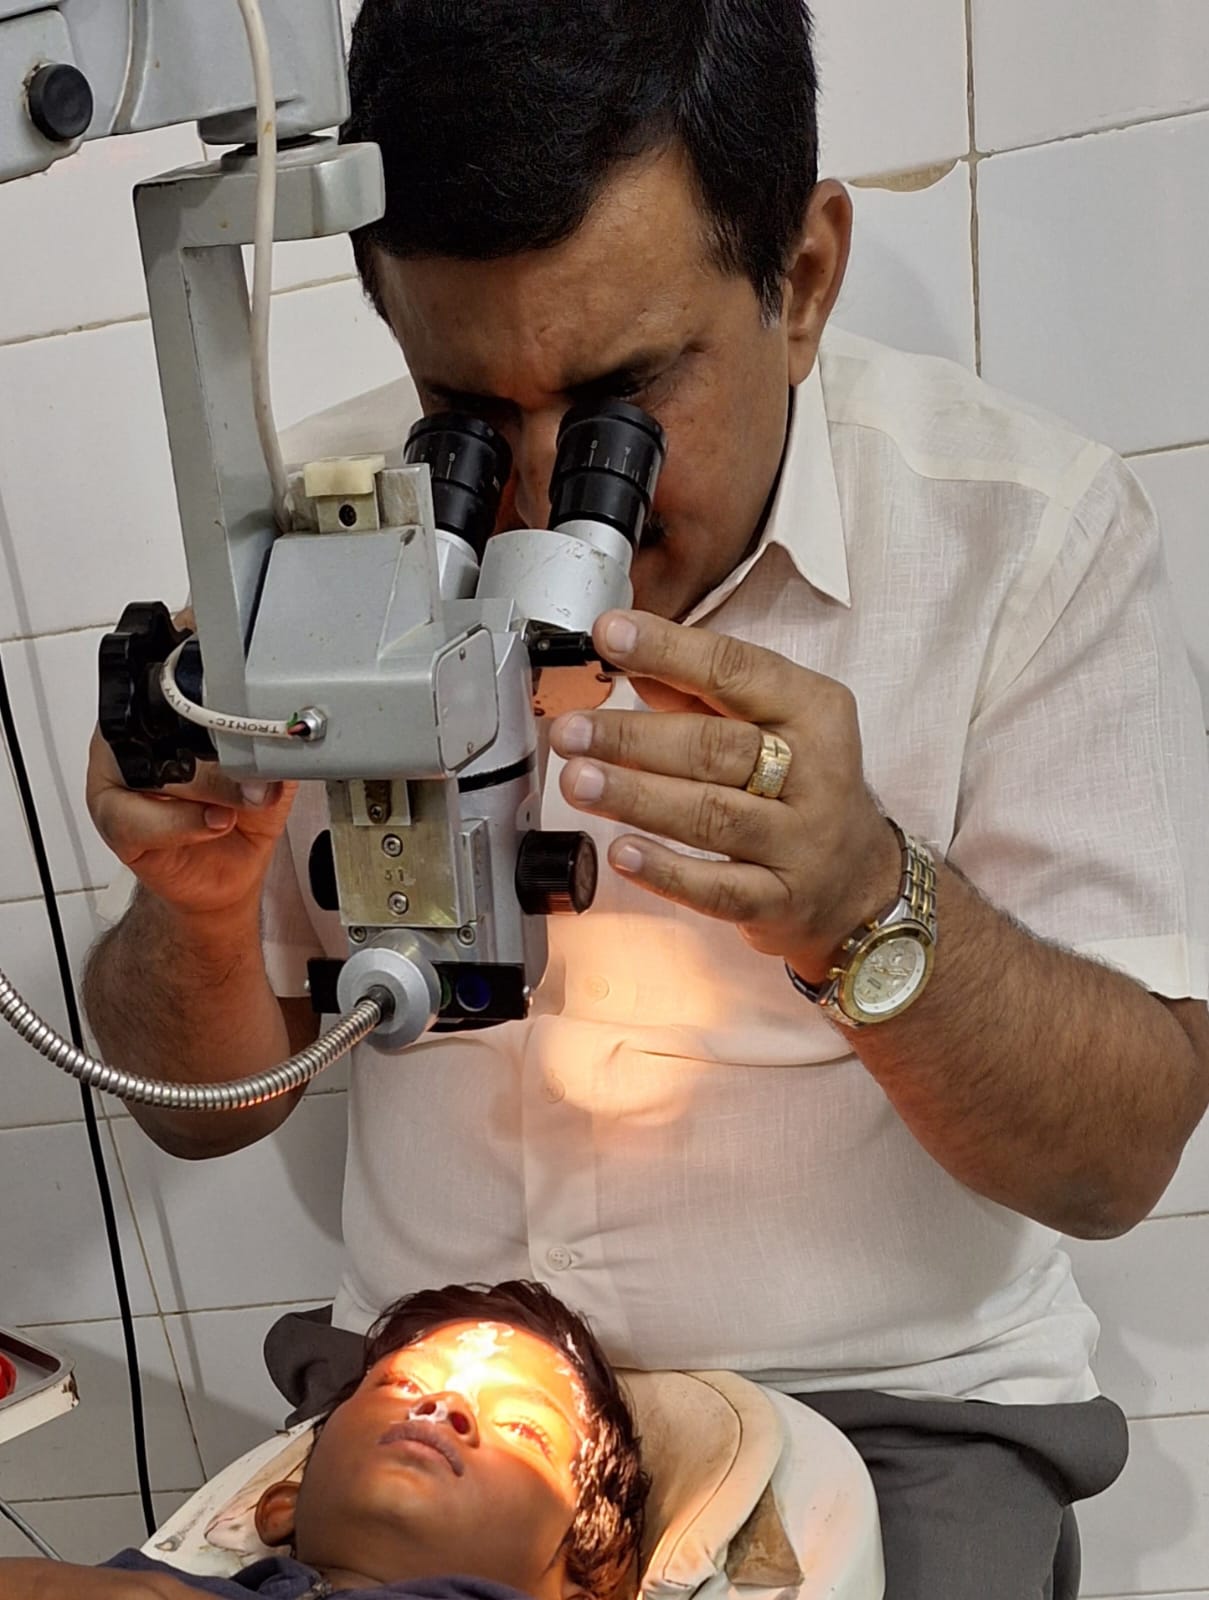 Senior eye and contact lens specialist Dr. Dinesh Mishra, treated 4150 patients free of cost, treated more than 3000 patients in Diwali and 1150 in Holi in 65 camps since 33 years, Raipur Eye Hospital located at Phool Chowk, Raipur.  , Chhattisgarh, Khabargali